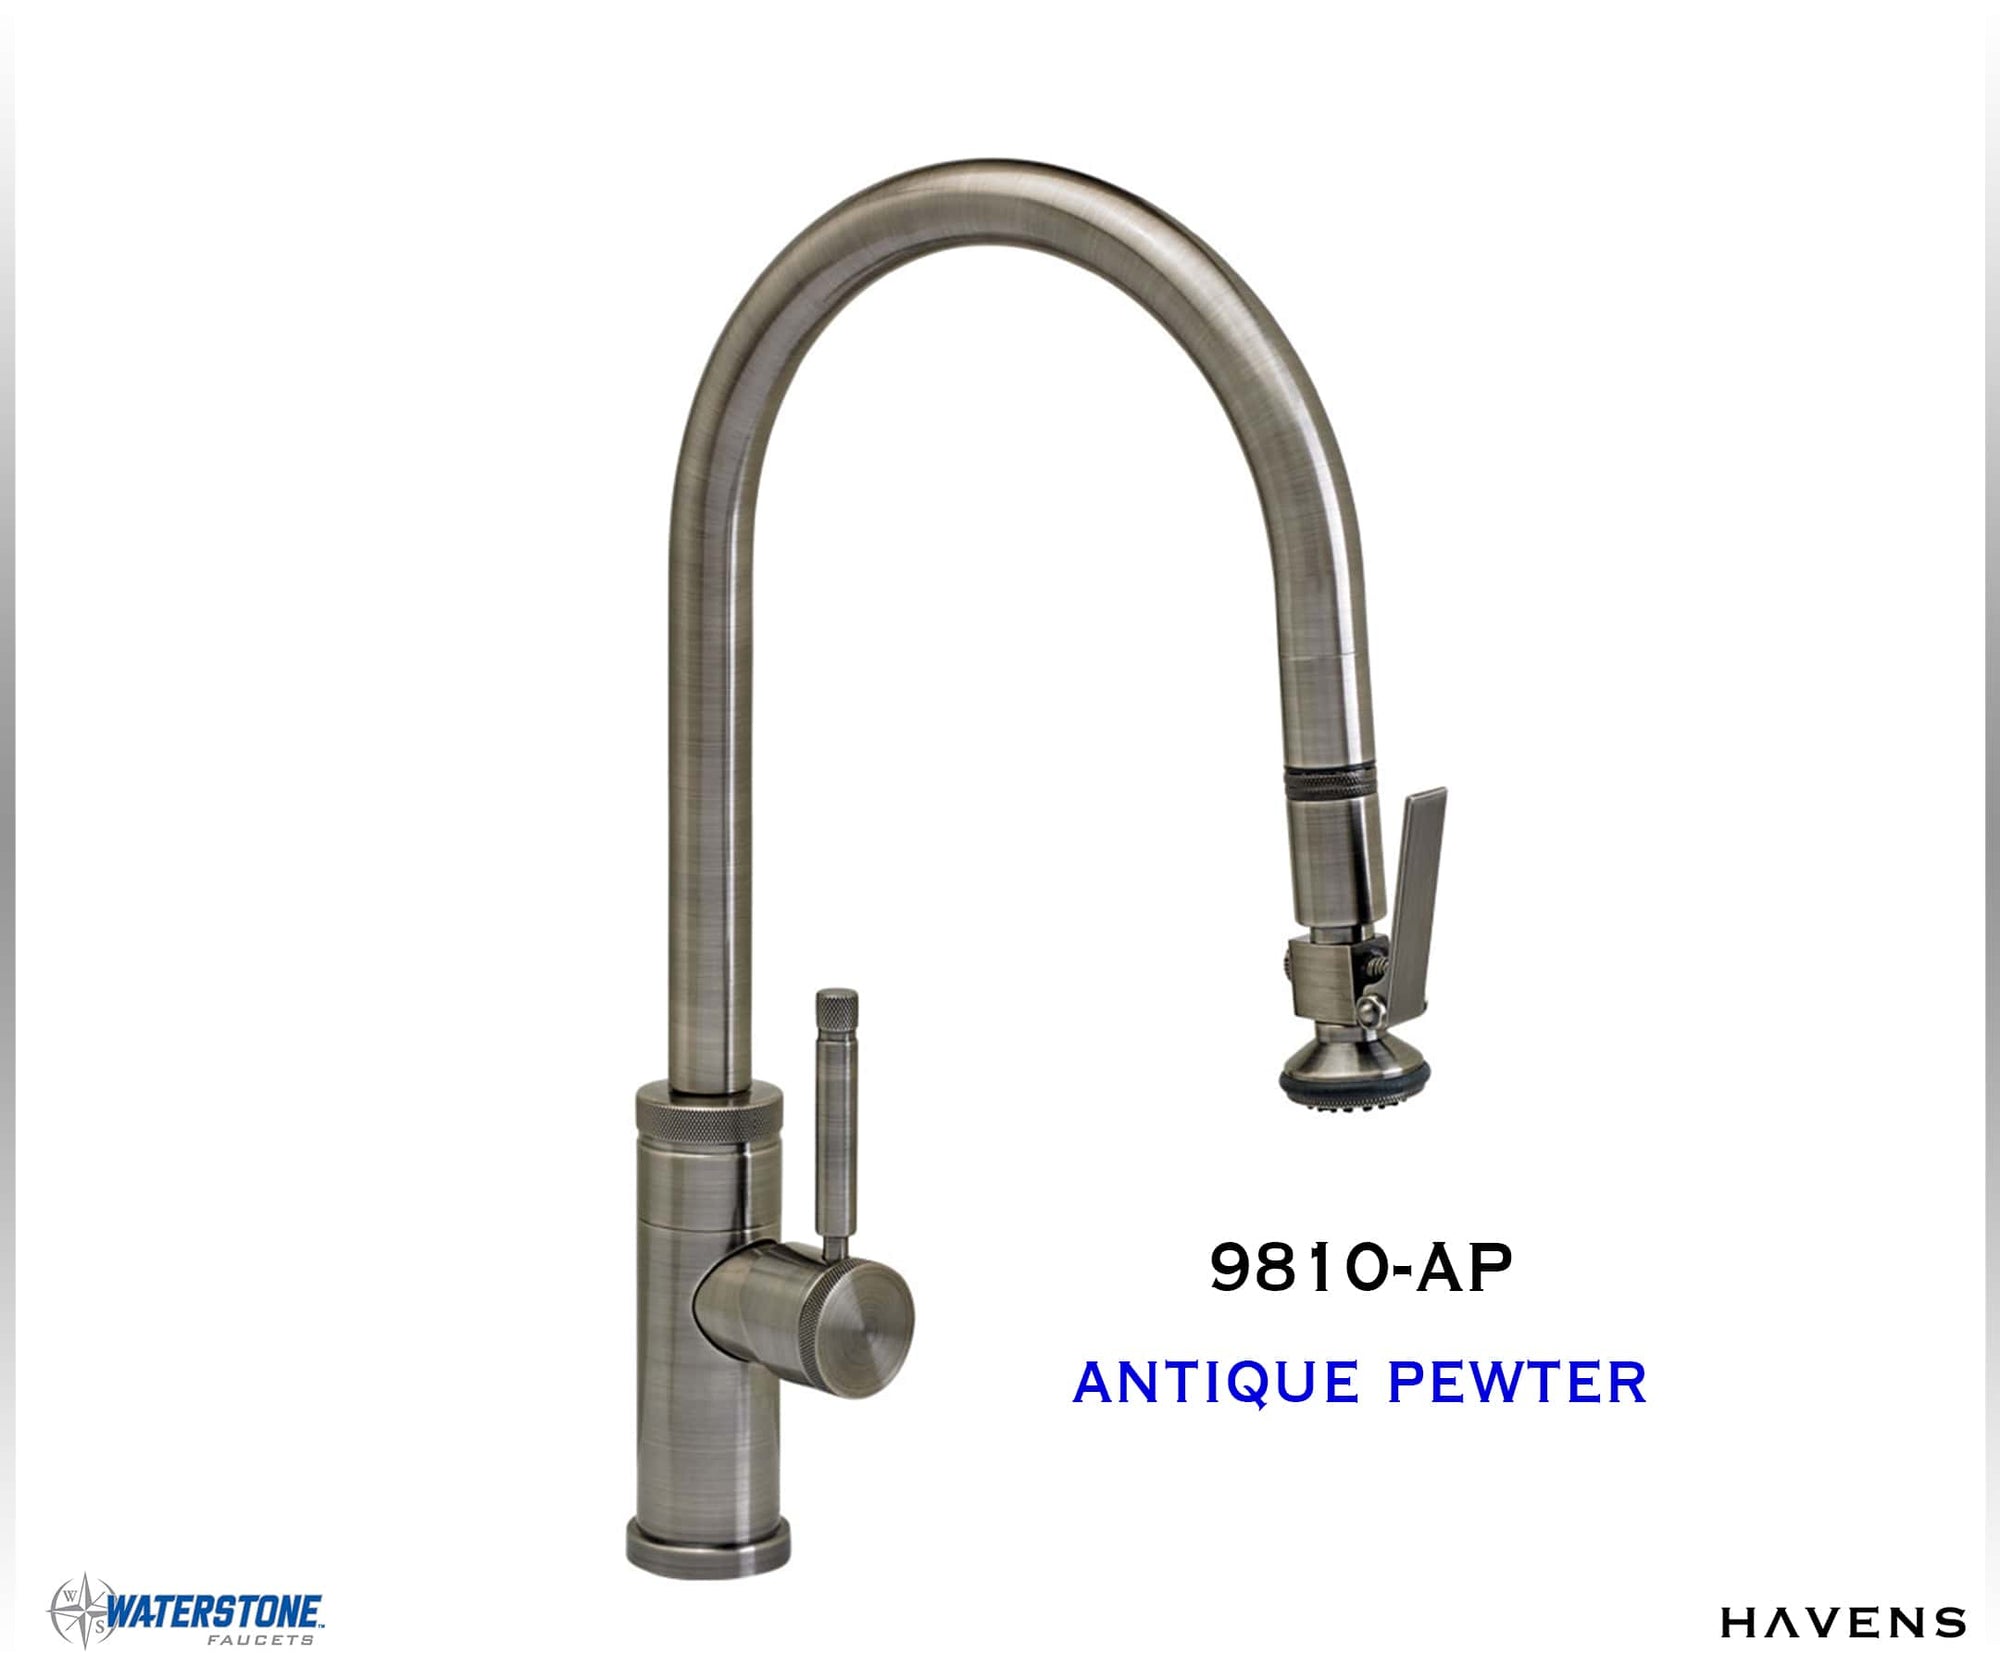 Waterstone Industrial PLP Pulldown Faucet - 9810 (Angled)